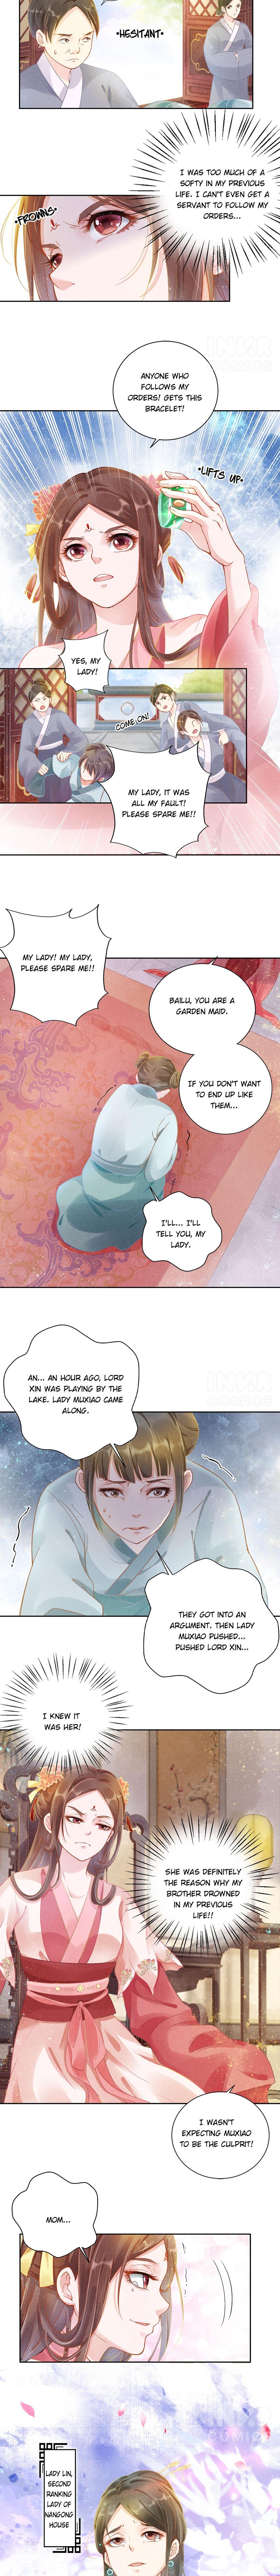 Spoiled Medical Princess: The Legend Of Alkaid - Page 3